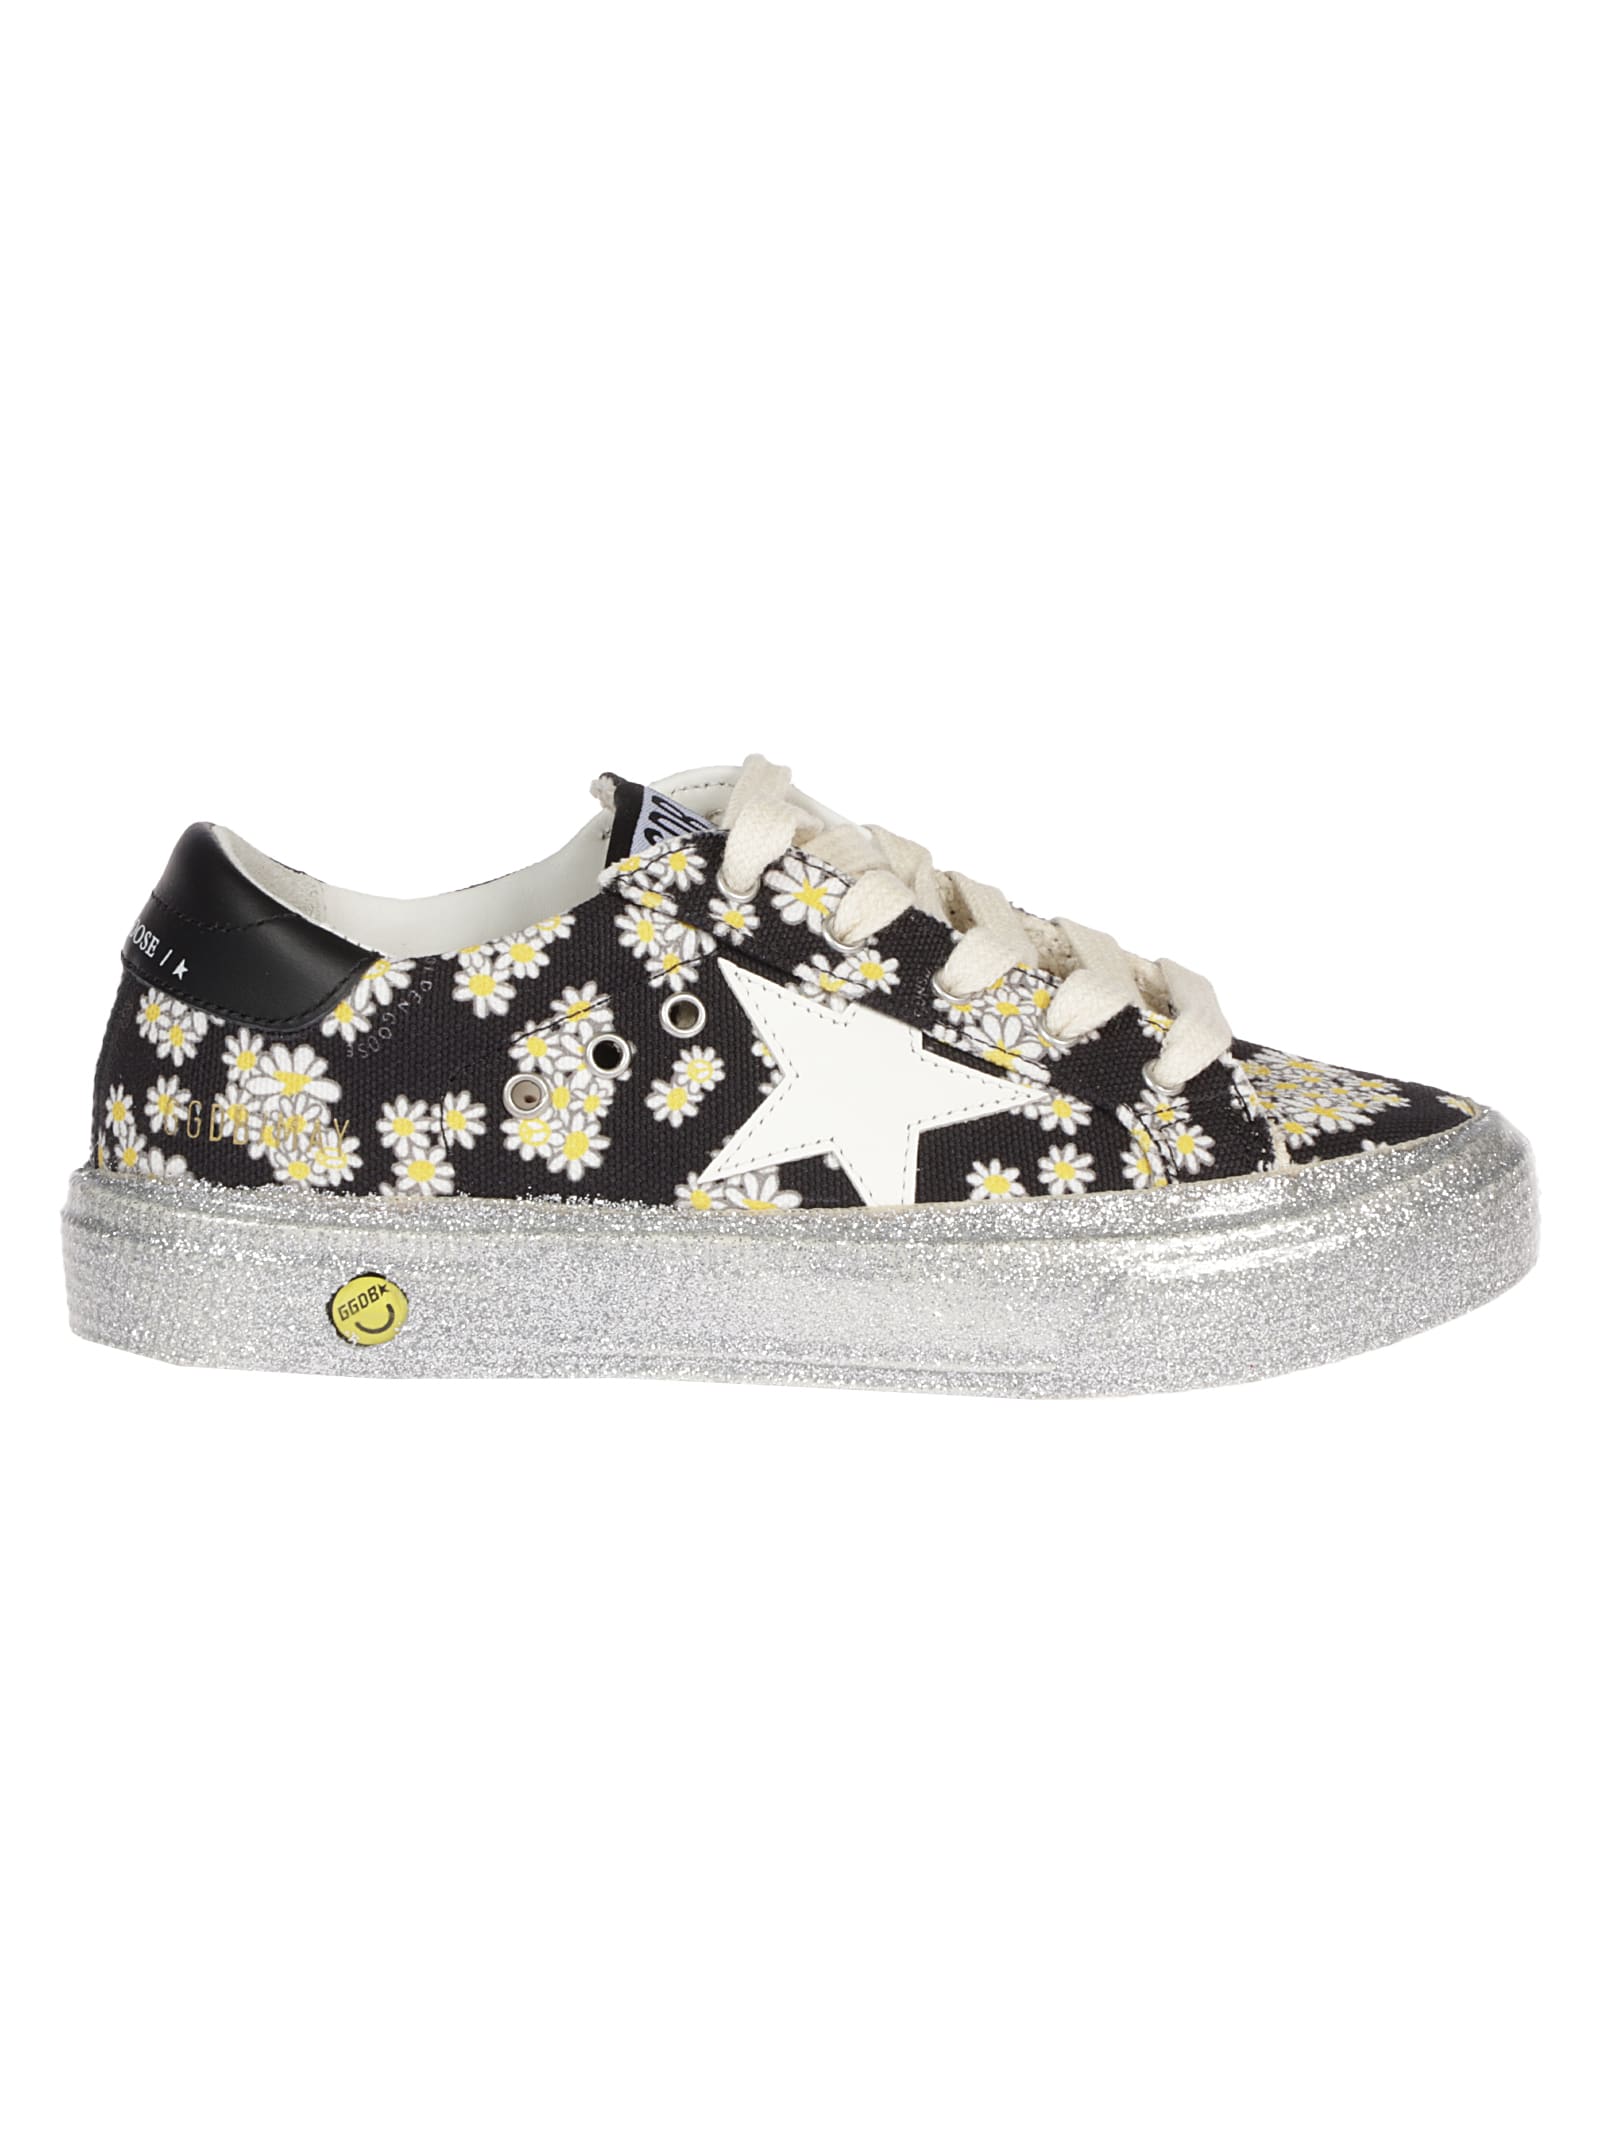 Golden Goose May Daisies Print Denim Upper Leather Star